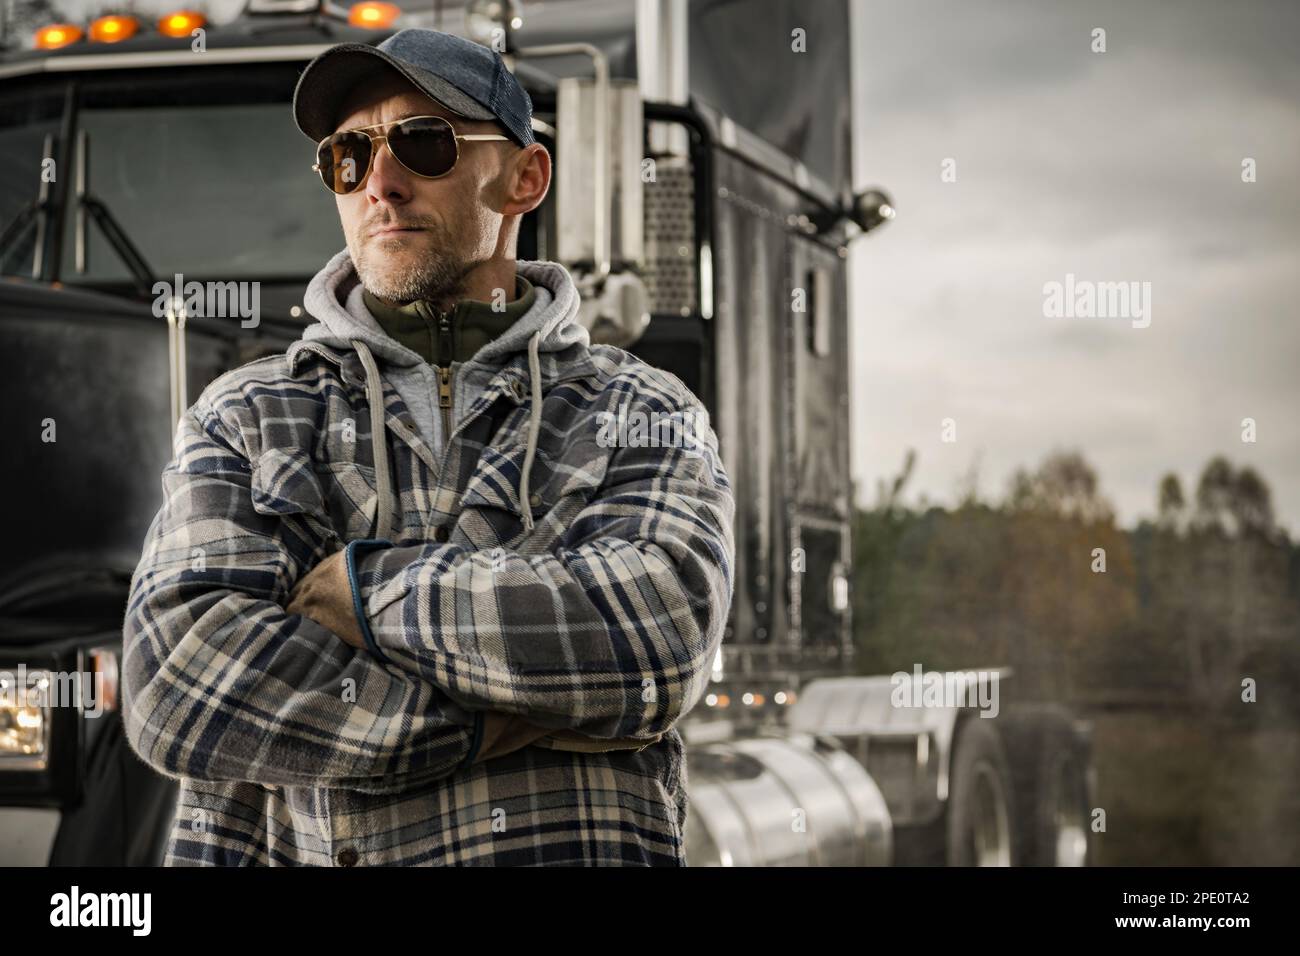 Caucasian Semi Truck Driver in His 40s and His American Tractor. Transportation Industry. Stock Photo